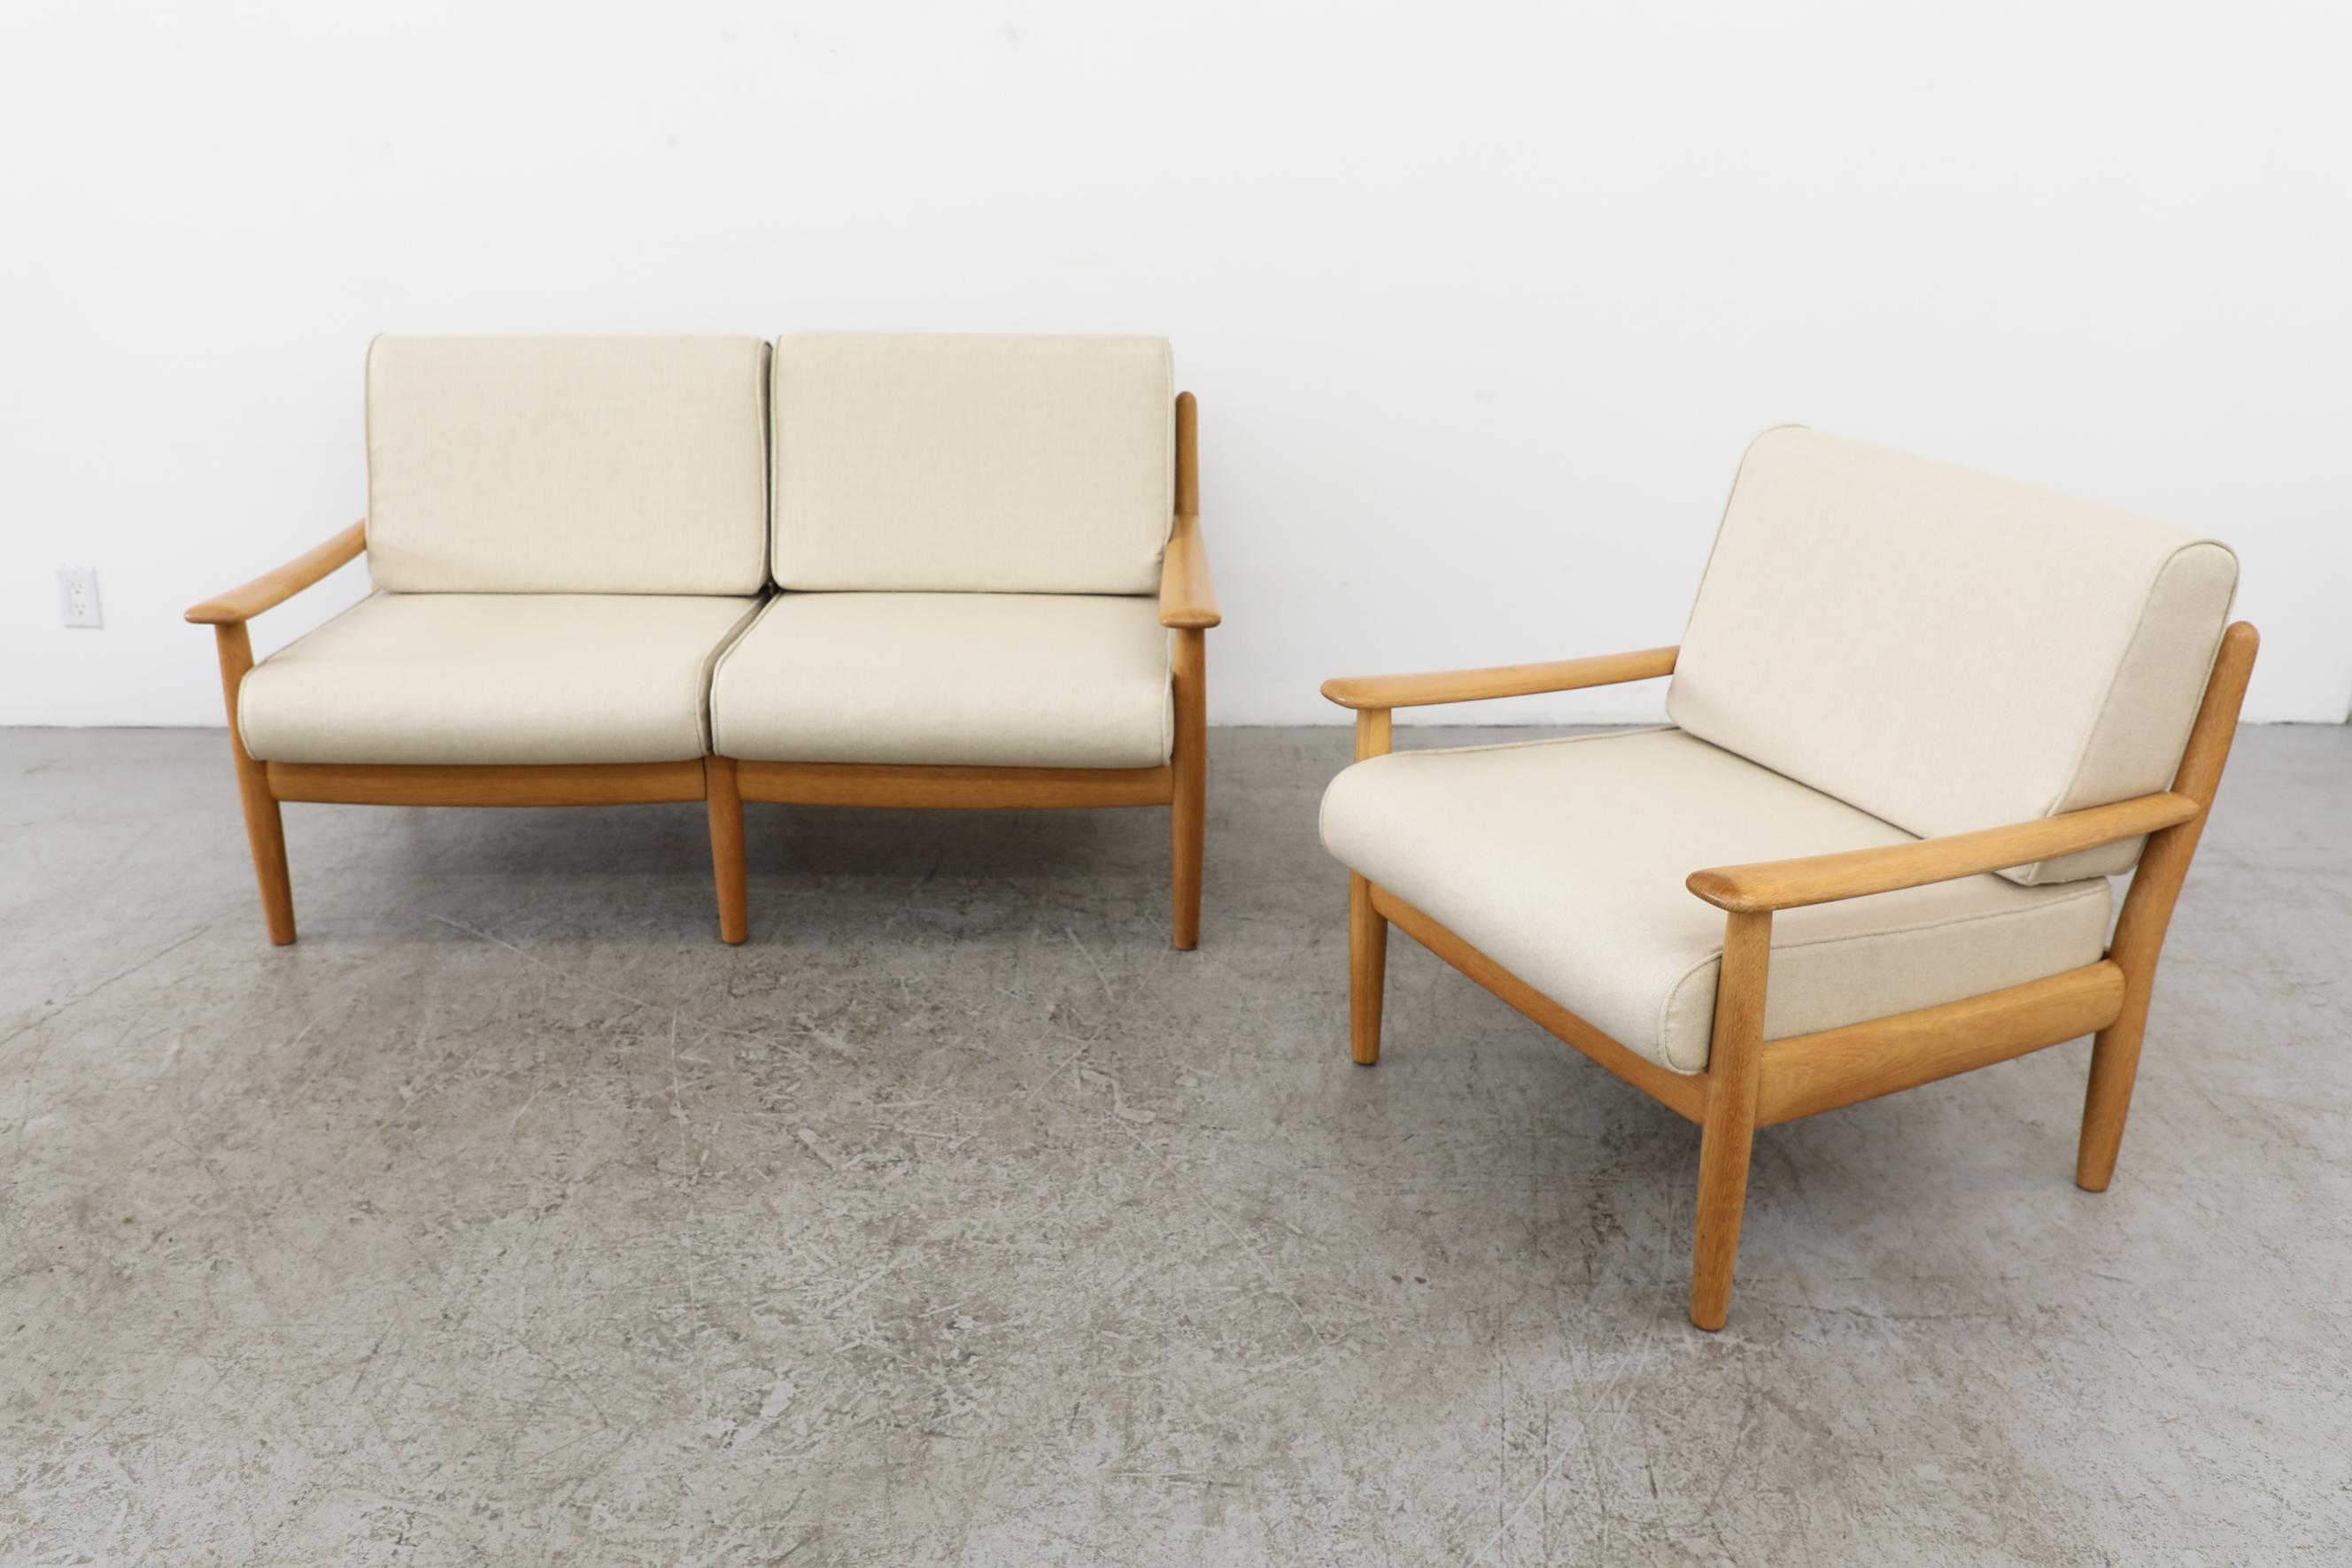 Wilhelm Knoll Oak Loveseat, Germany 1960's. Clearly influenced by Borge Mogensen with the clean natural fat round oak frames and simple lines. The frame is in original condition with new cream upholstery. There is some visible wear to the frame that